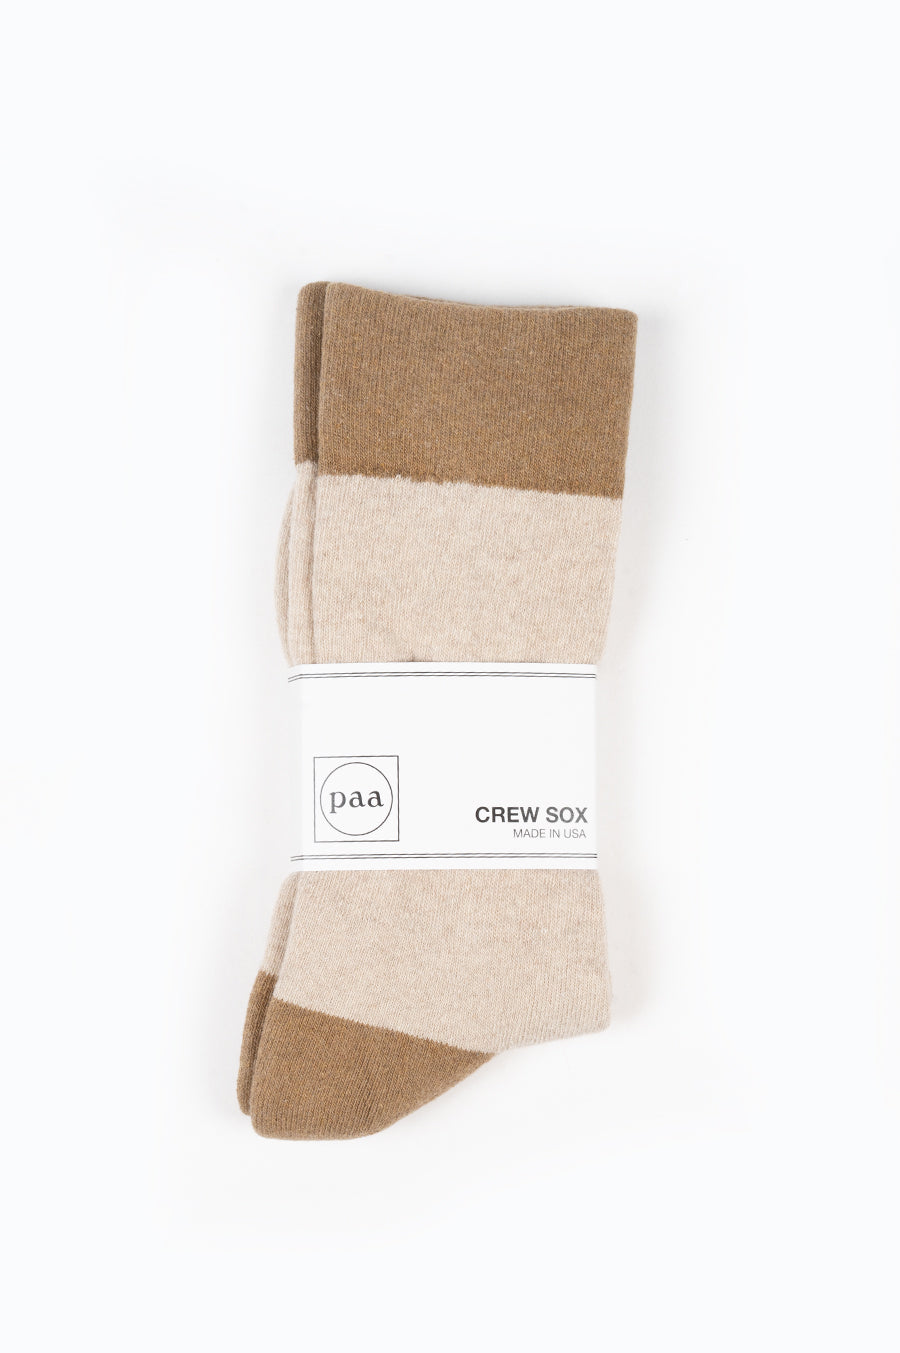 HOUSE OF PAA RECYCLED CREW SOX 2.5 CAFE